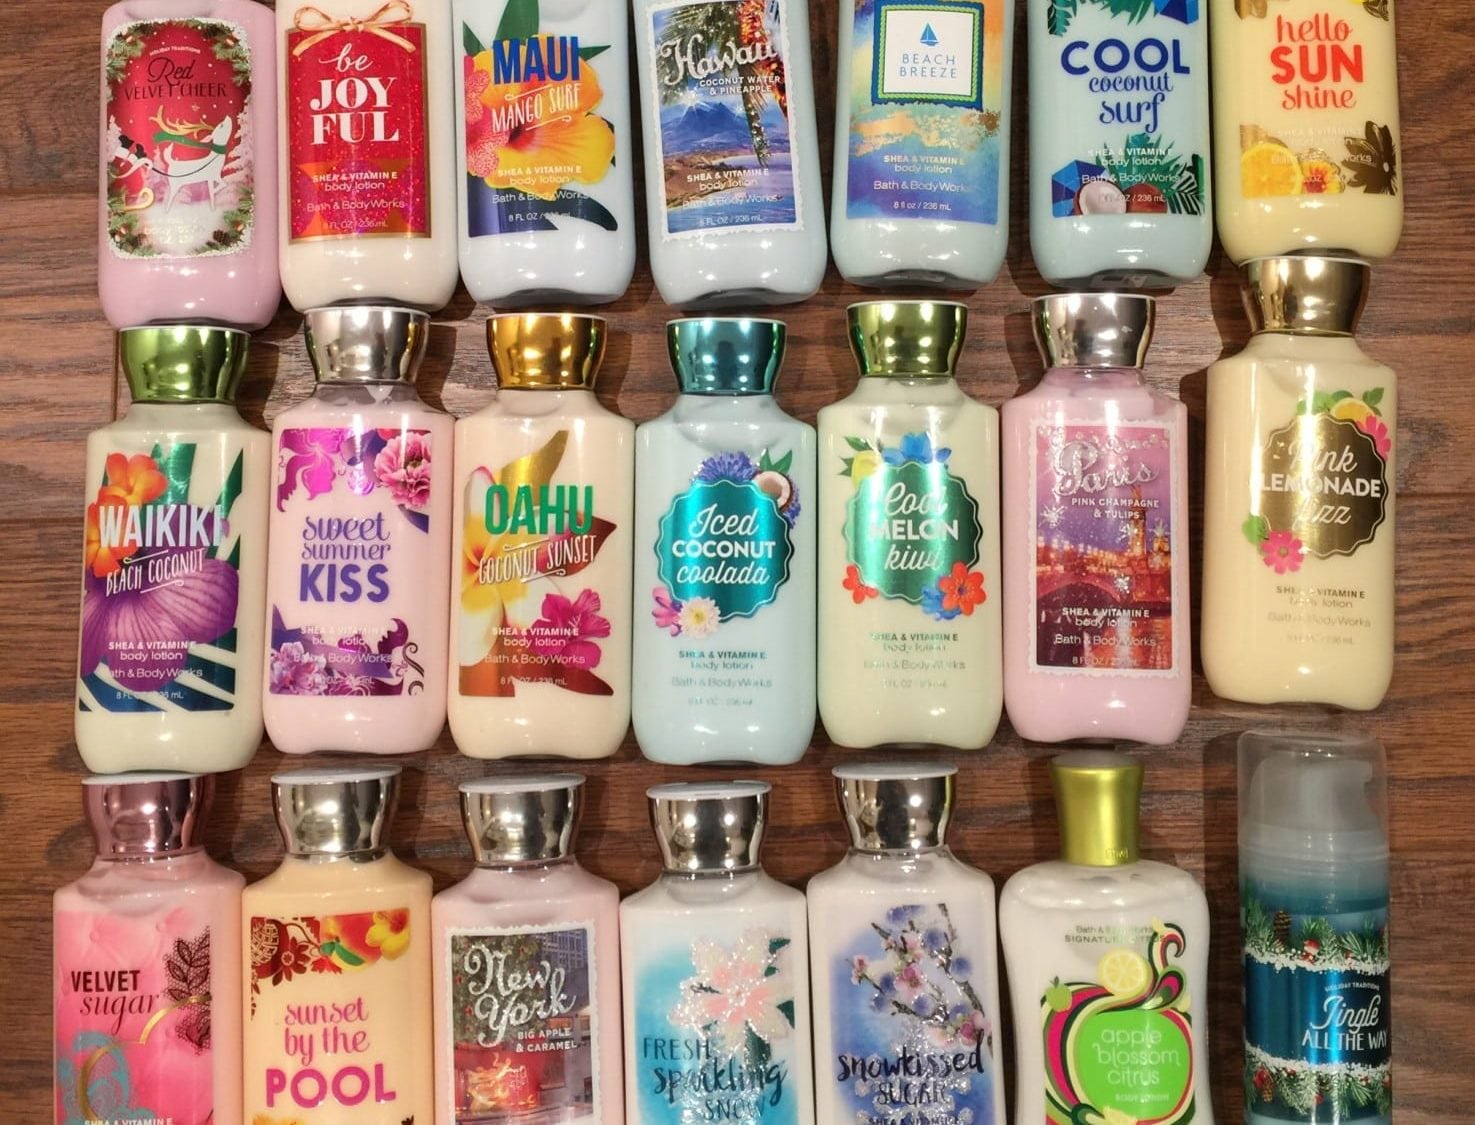 Bath & Body Works' massive semiannual sale is on now—Get 75 off